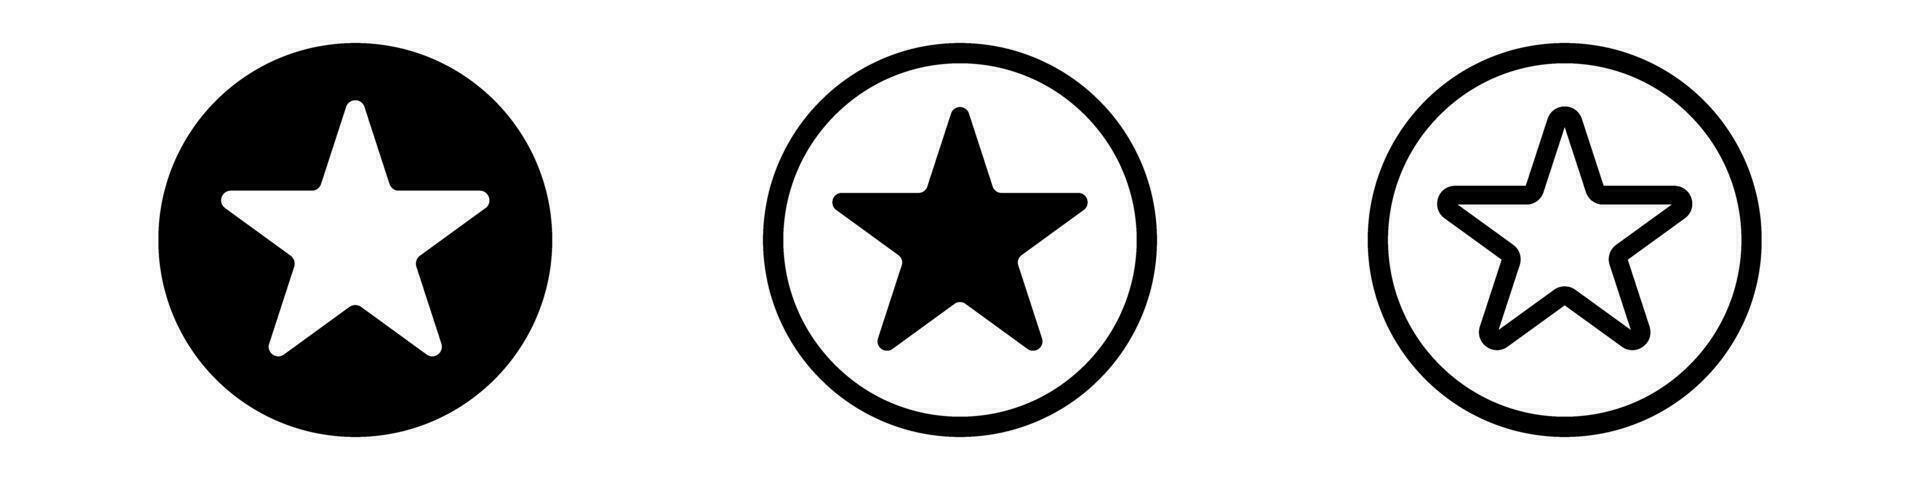 Black And White Library Star In Logos Round Vector - Eu Stars Png  Transparent PNG - 725x720 - Free Download on NicePNG